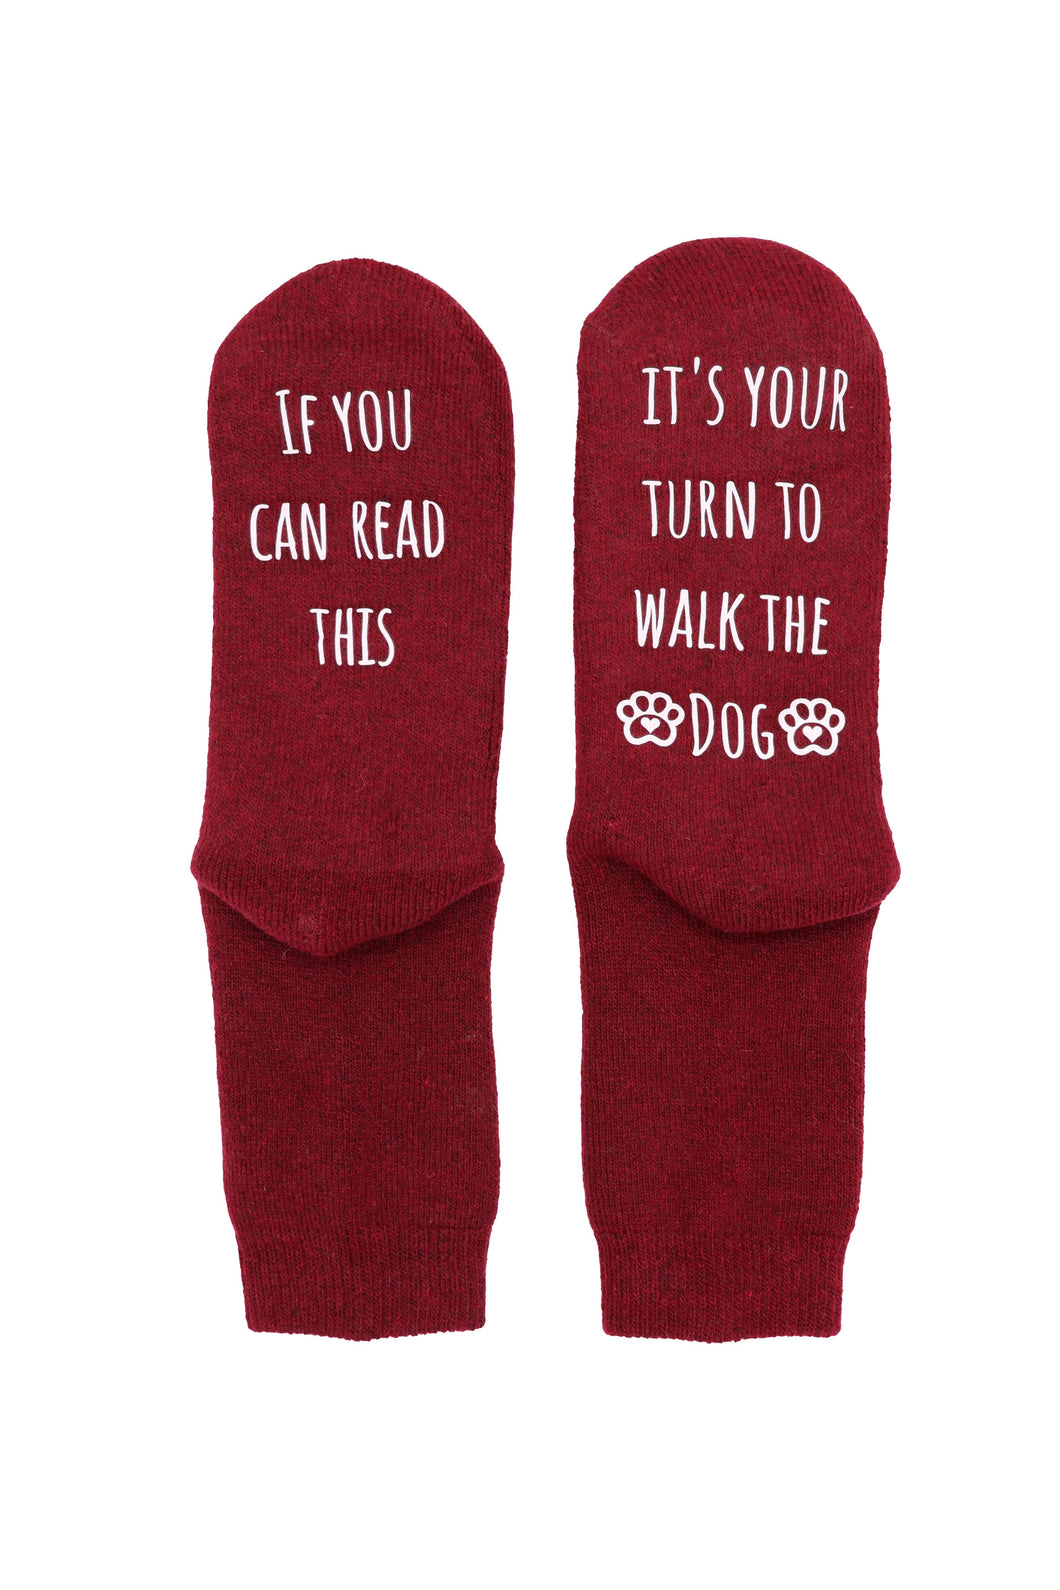 If you can read this - Socks